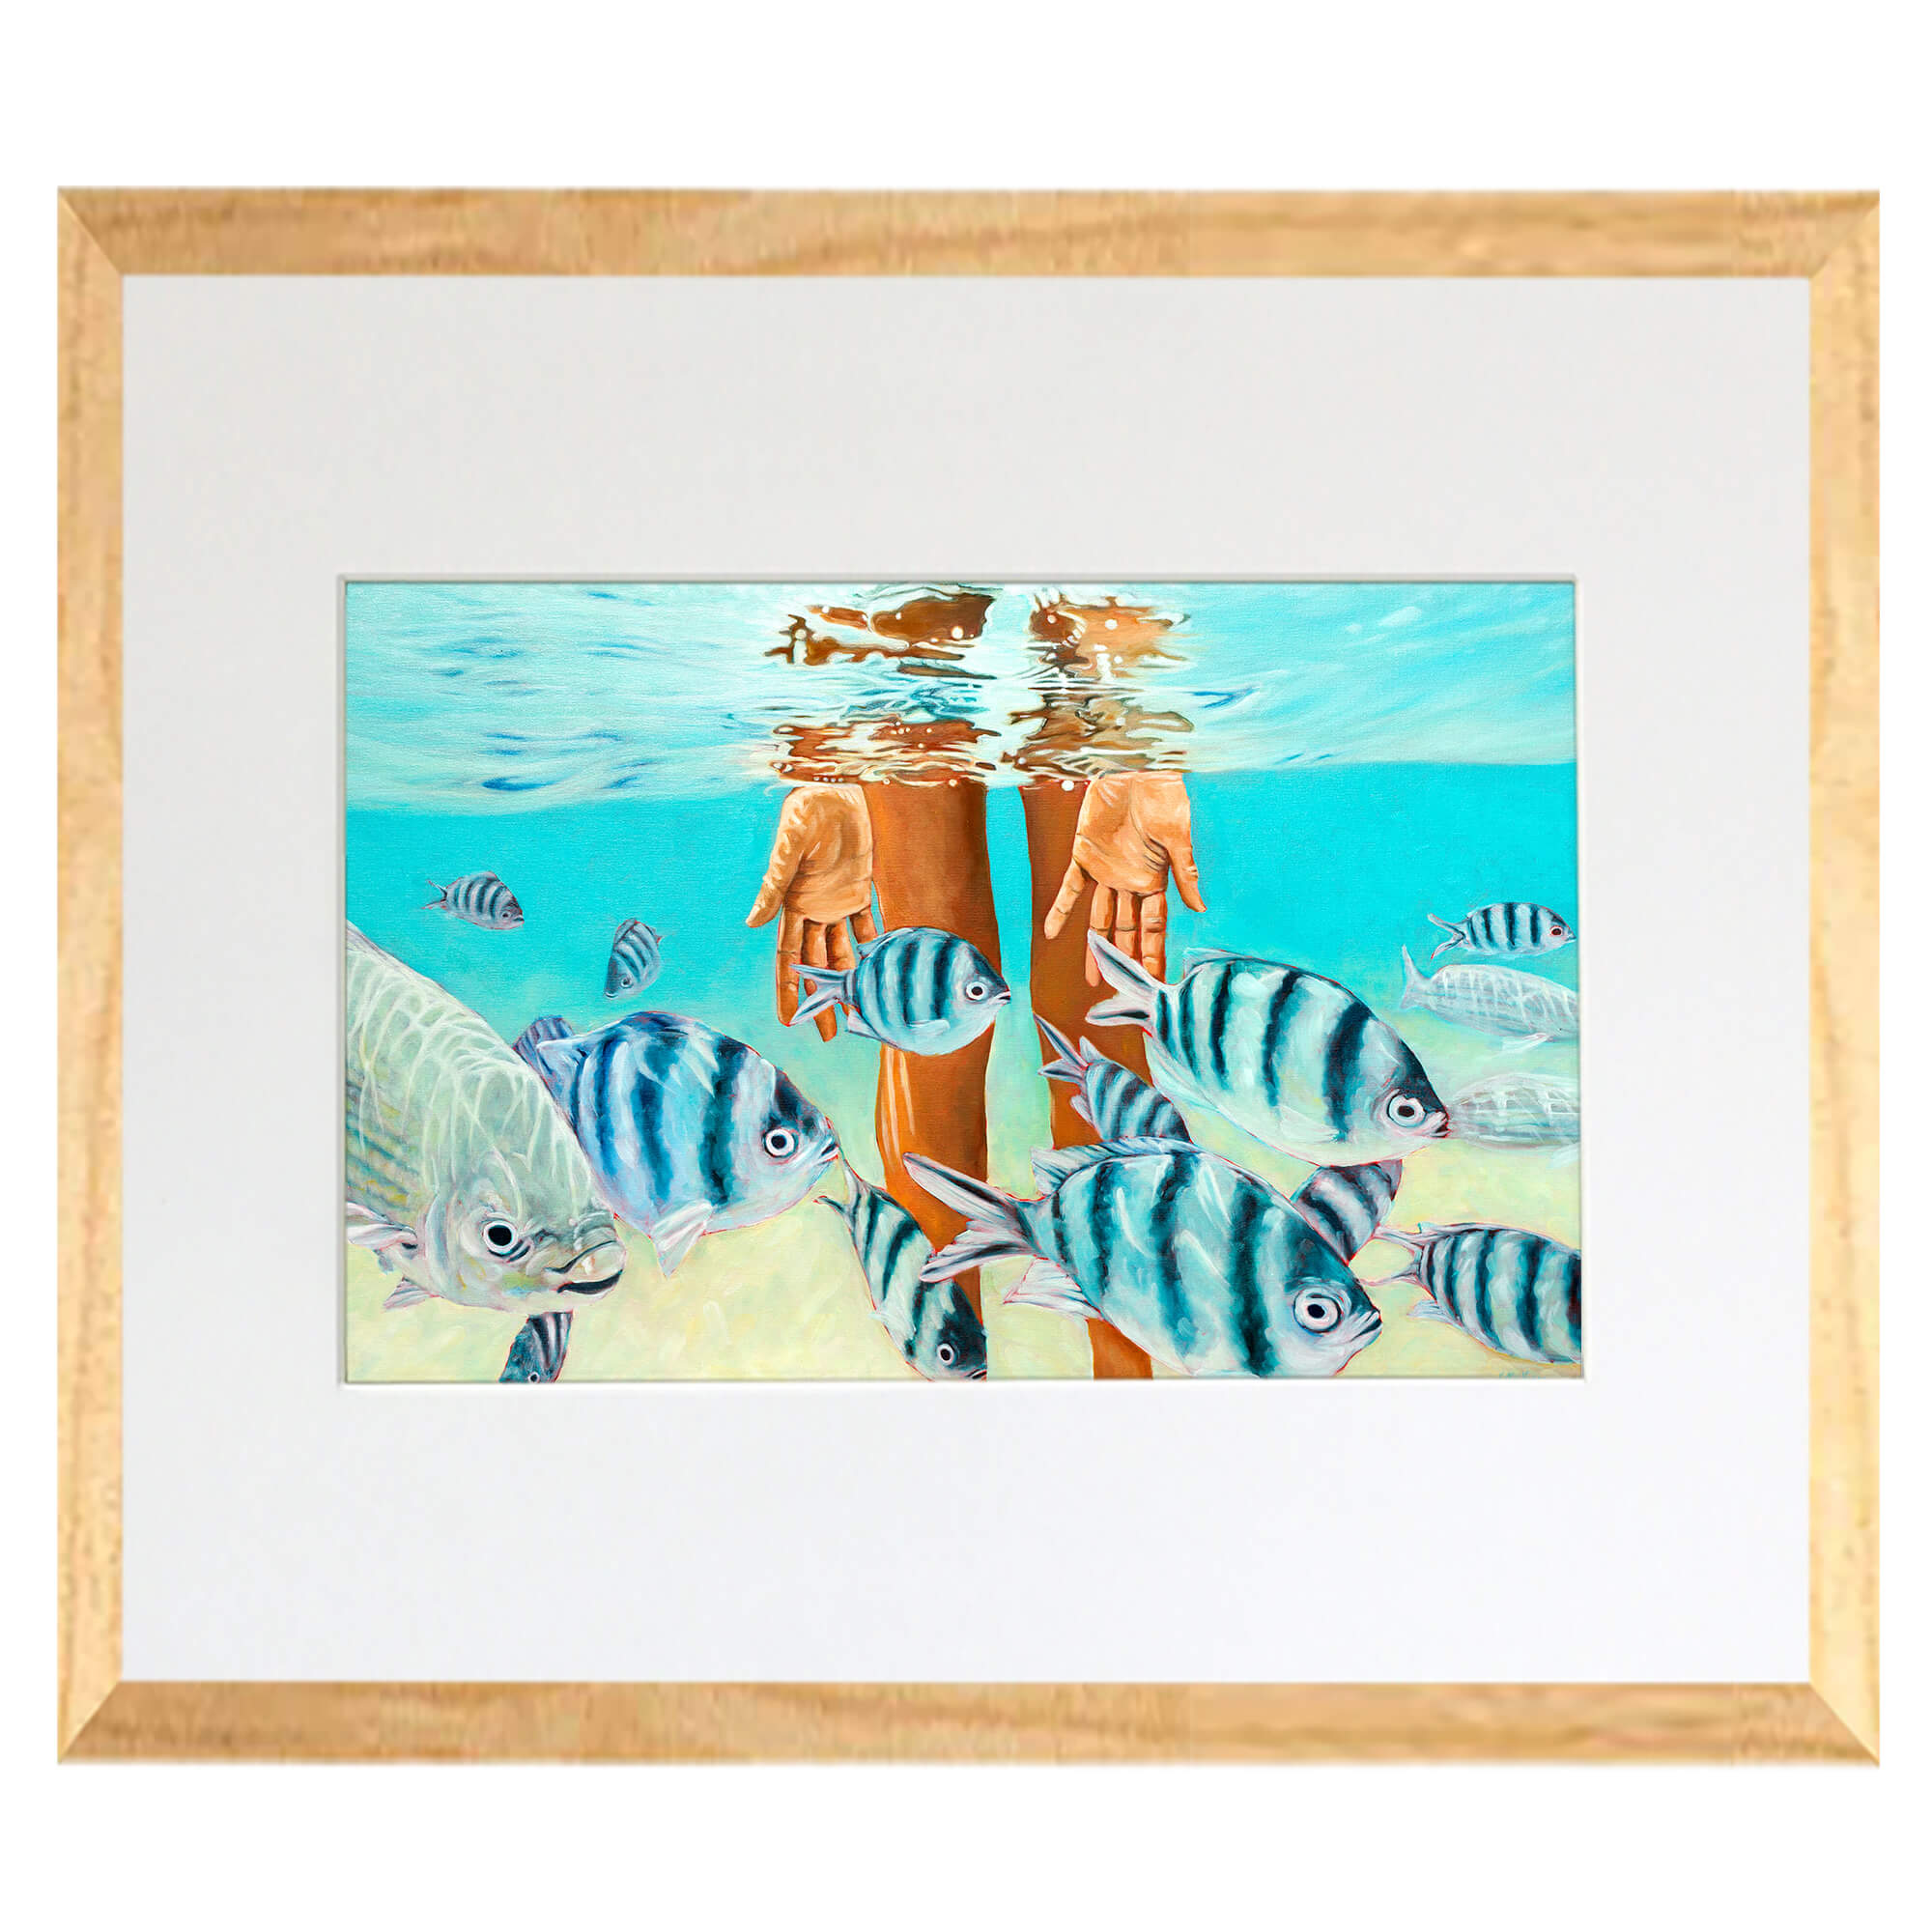 Matted art print depicting blue fishes swimming in the blue sea  by hawaii artist Kelly Keane